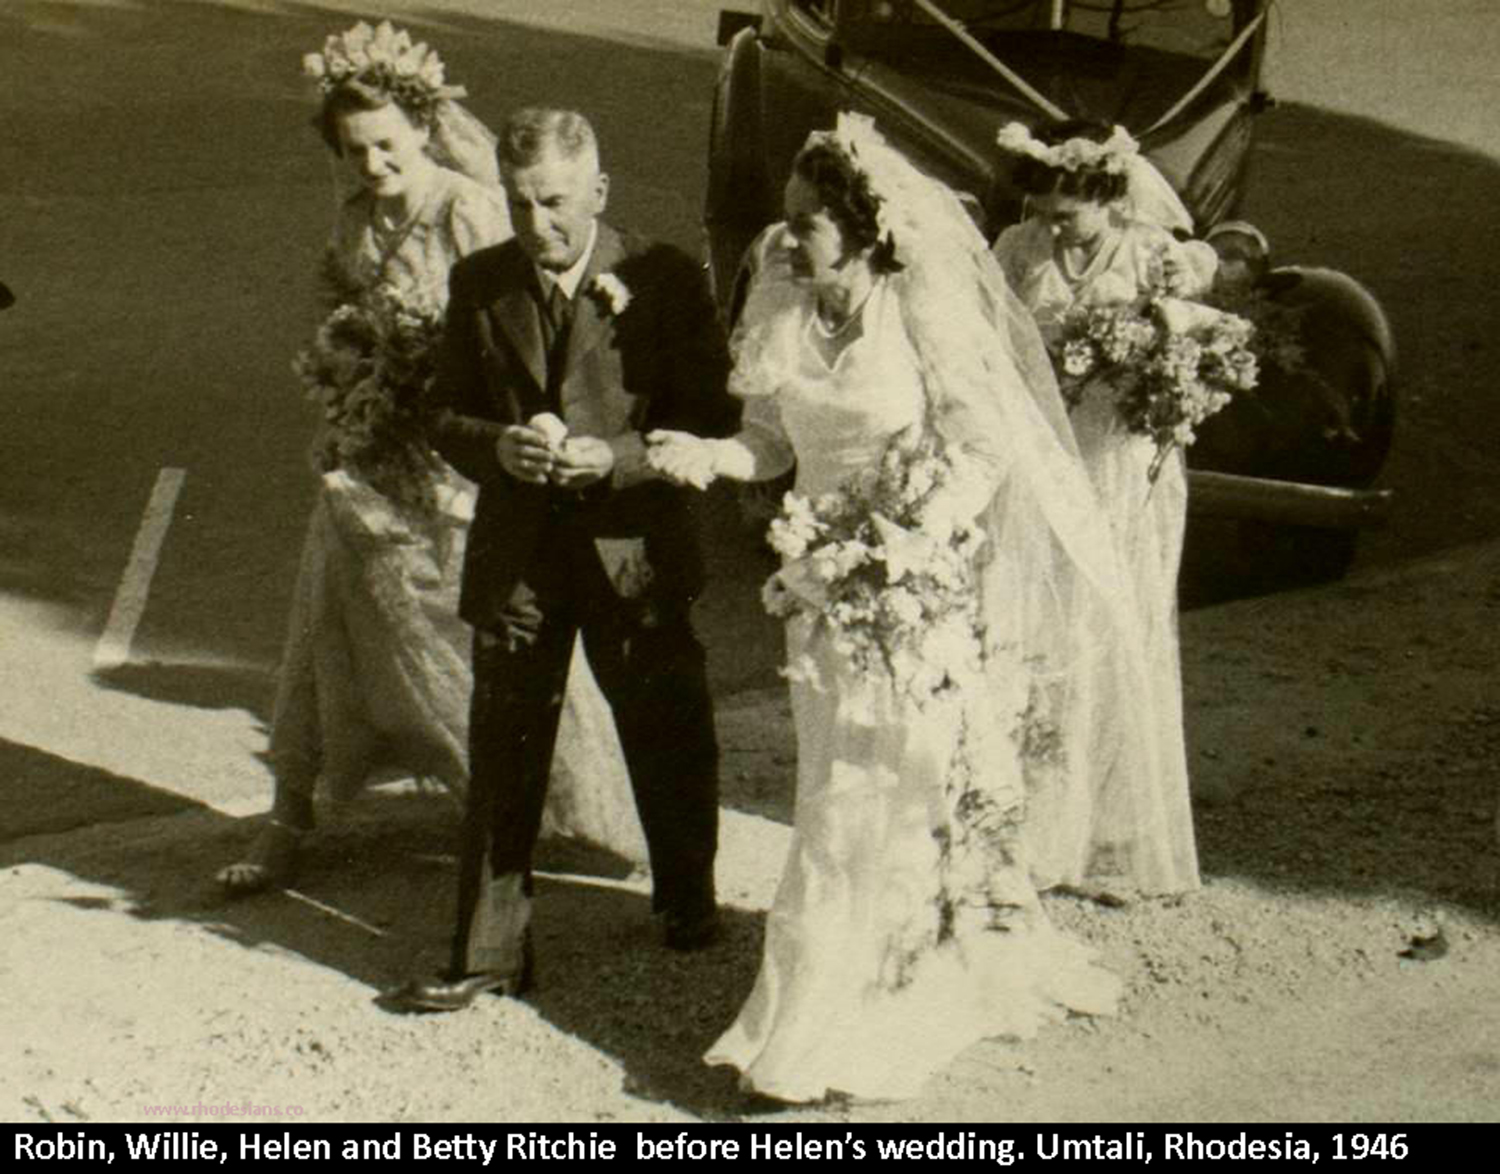 Helen Ritchie at her wedding with her father and sisters